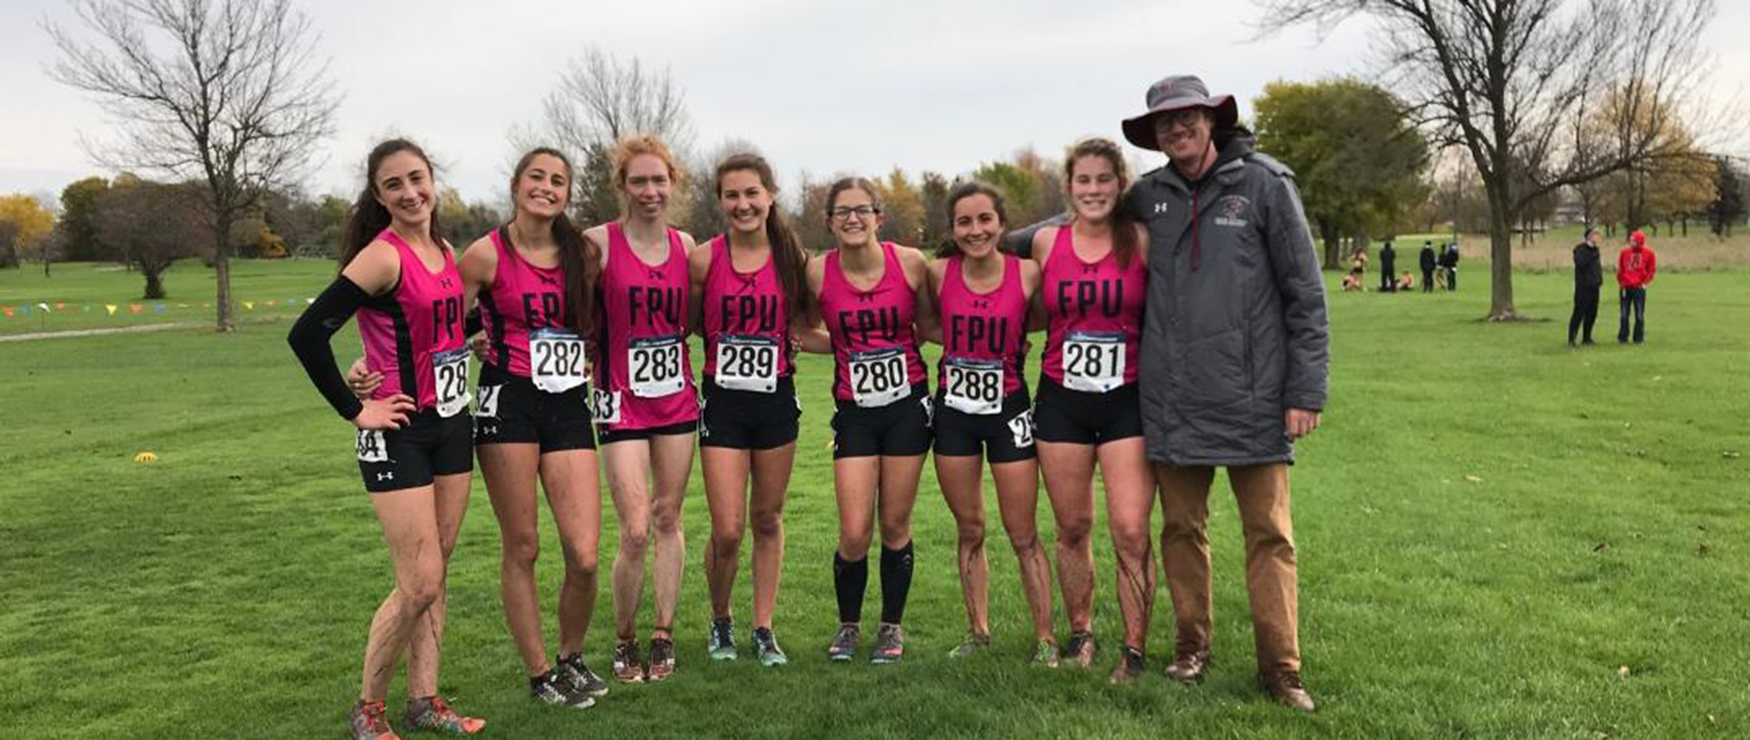 Women’s Cross Country Finishes Program-Best 12th at NCAA Championship East Regional